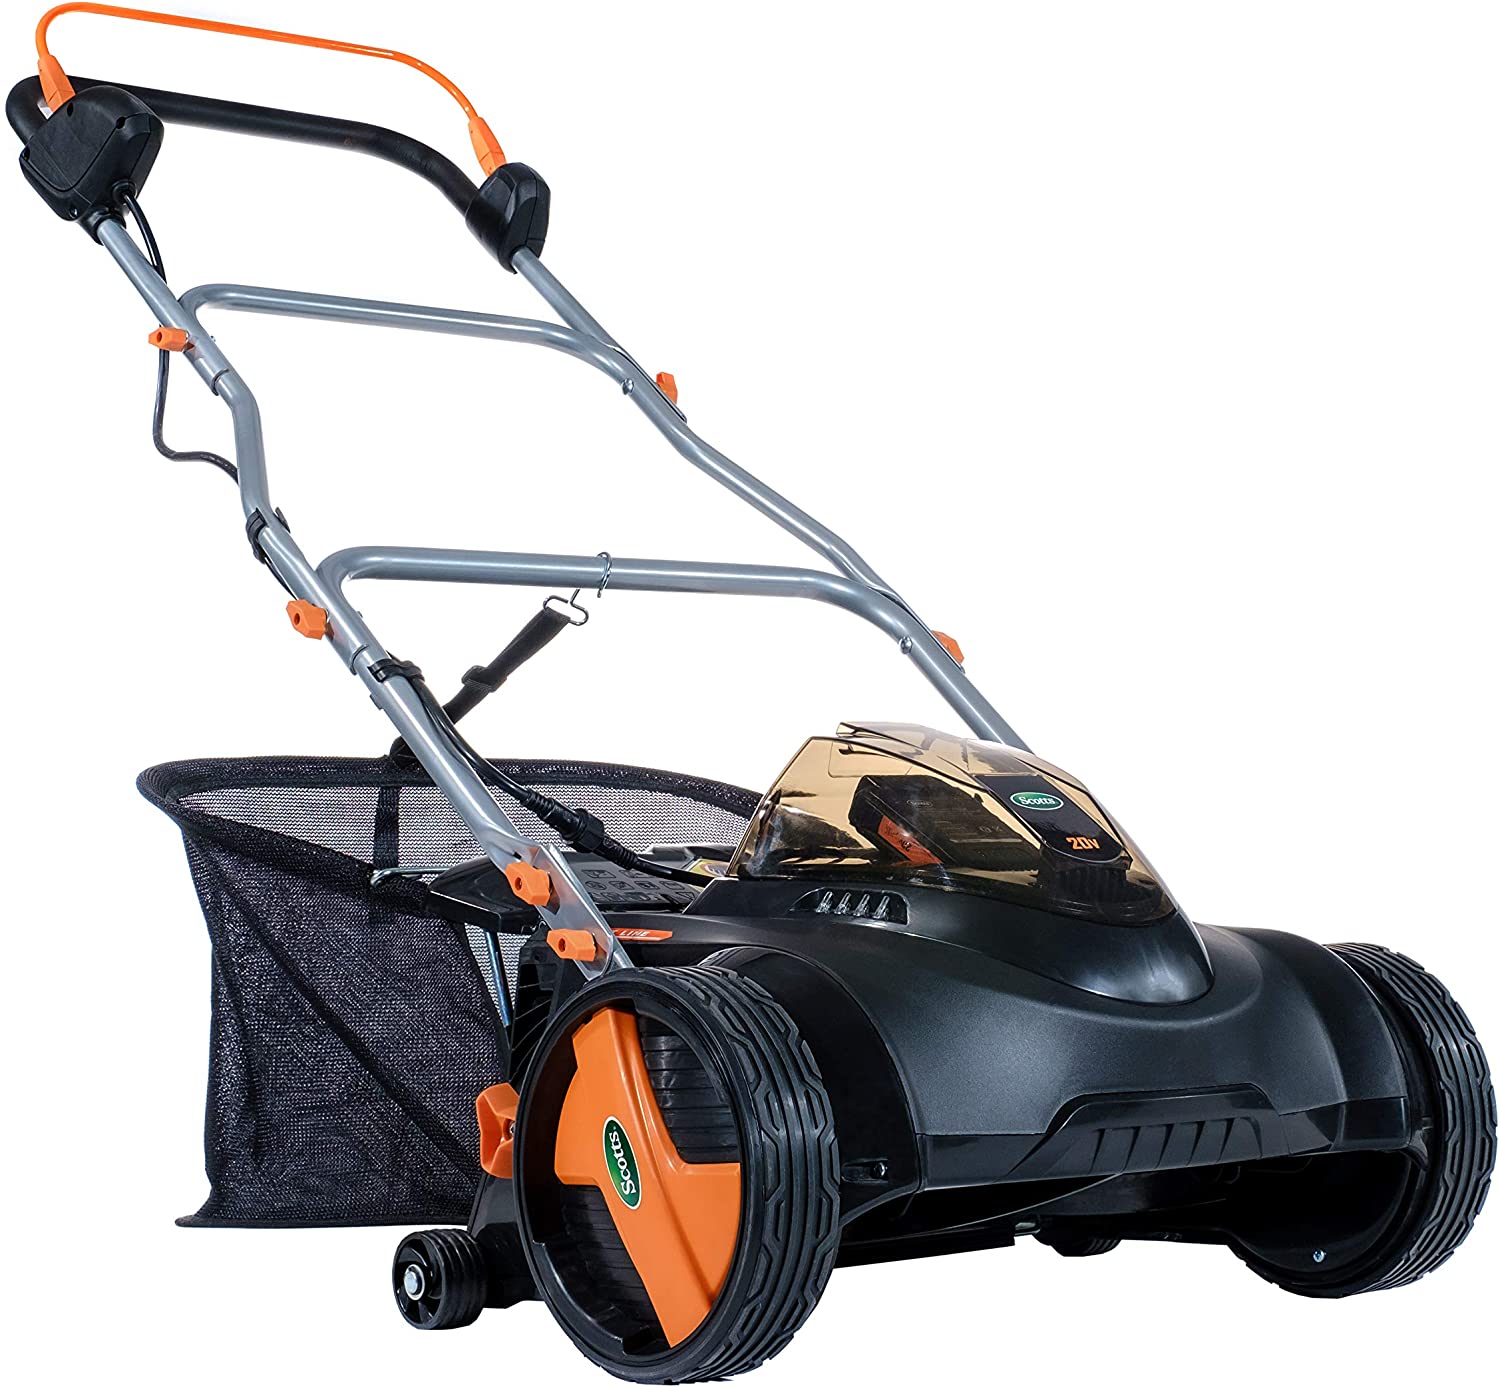 Scotts Cordless Electric Reel Lawn Mower, 20V, 16-Inch Cut Width,  5-Position Height Adjustment, Includes Battery and Charger